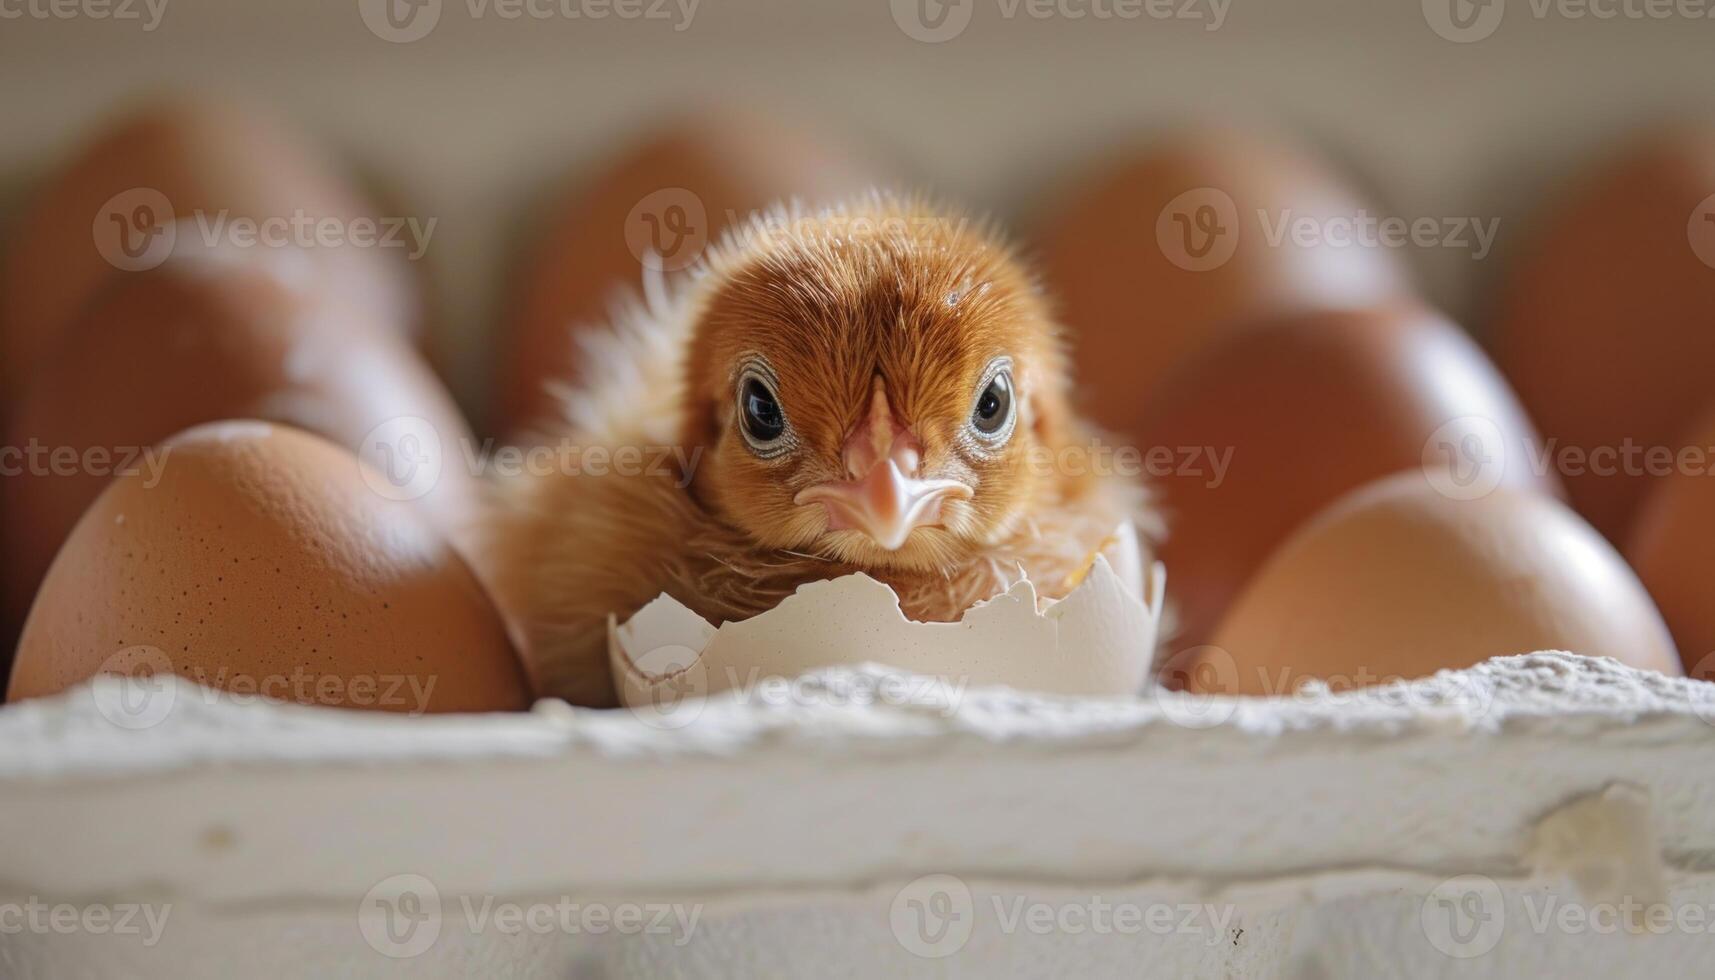 AI generated Cute chick hatches from egg on tray a delightful moment captured in this adorable image of new life emerging, baby animals picture photo